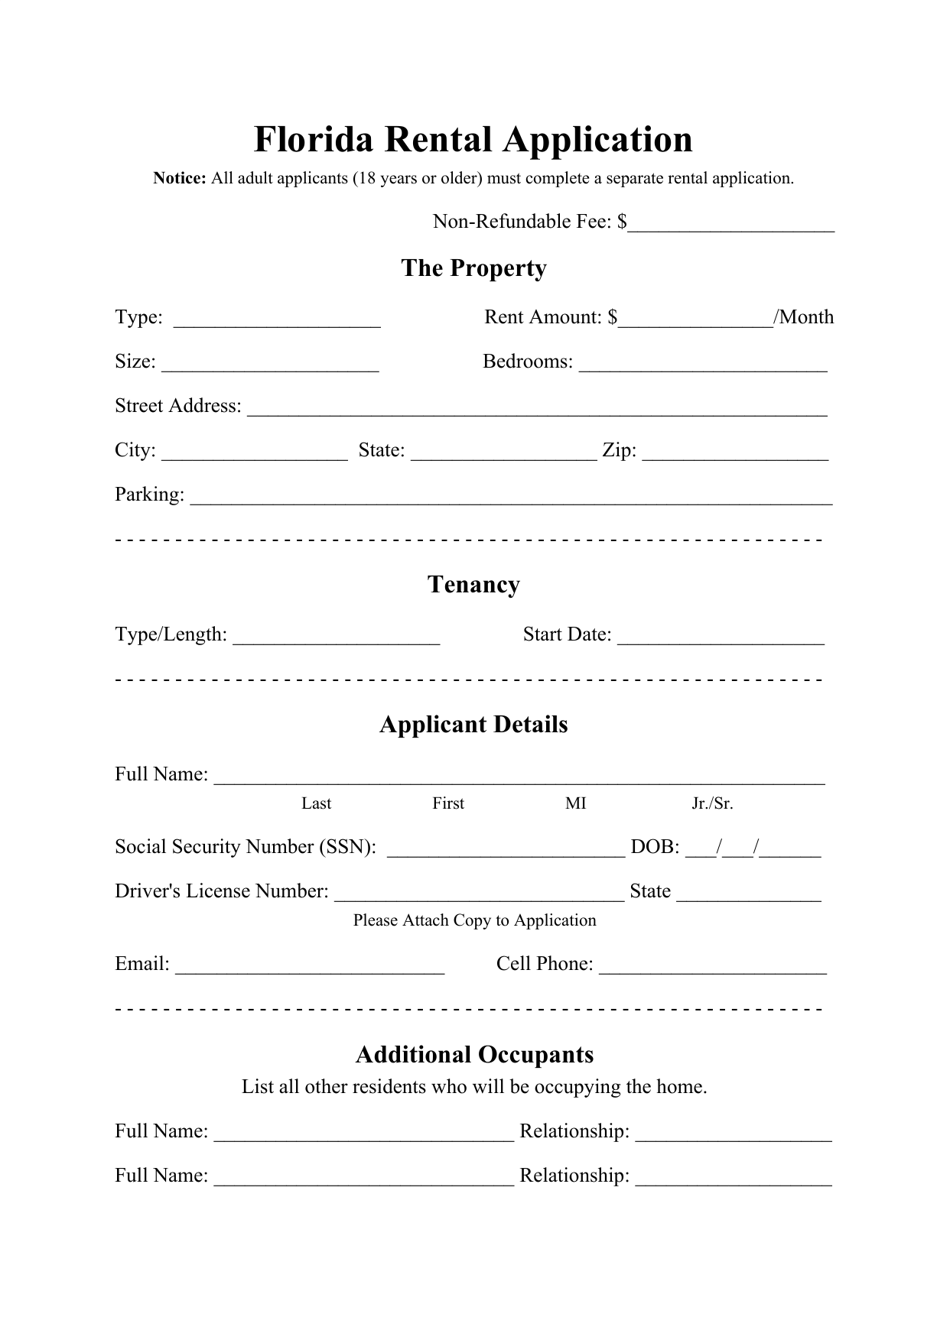 Florida Rental Application Form Fill Out Sign Online and Download